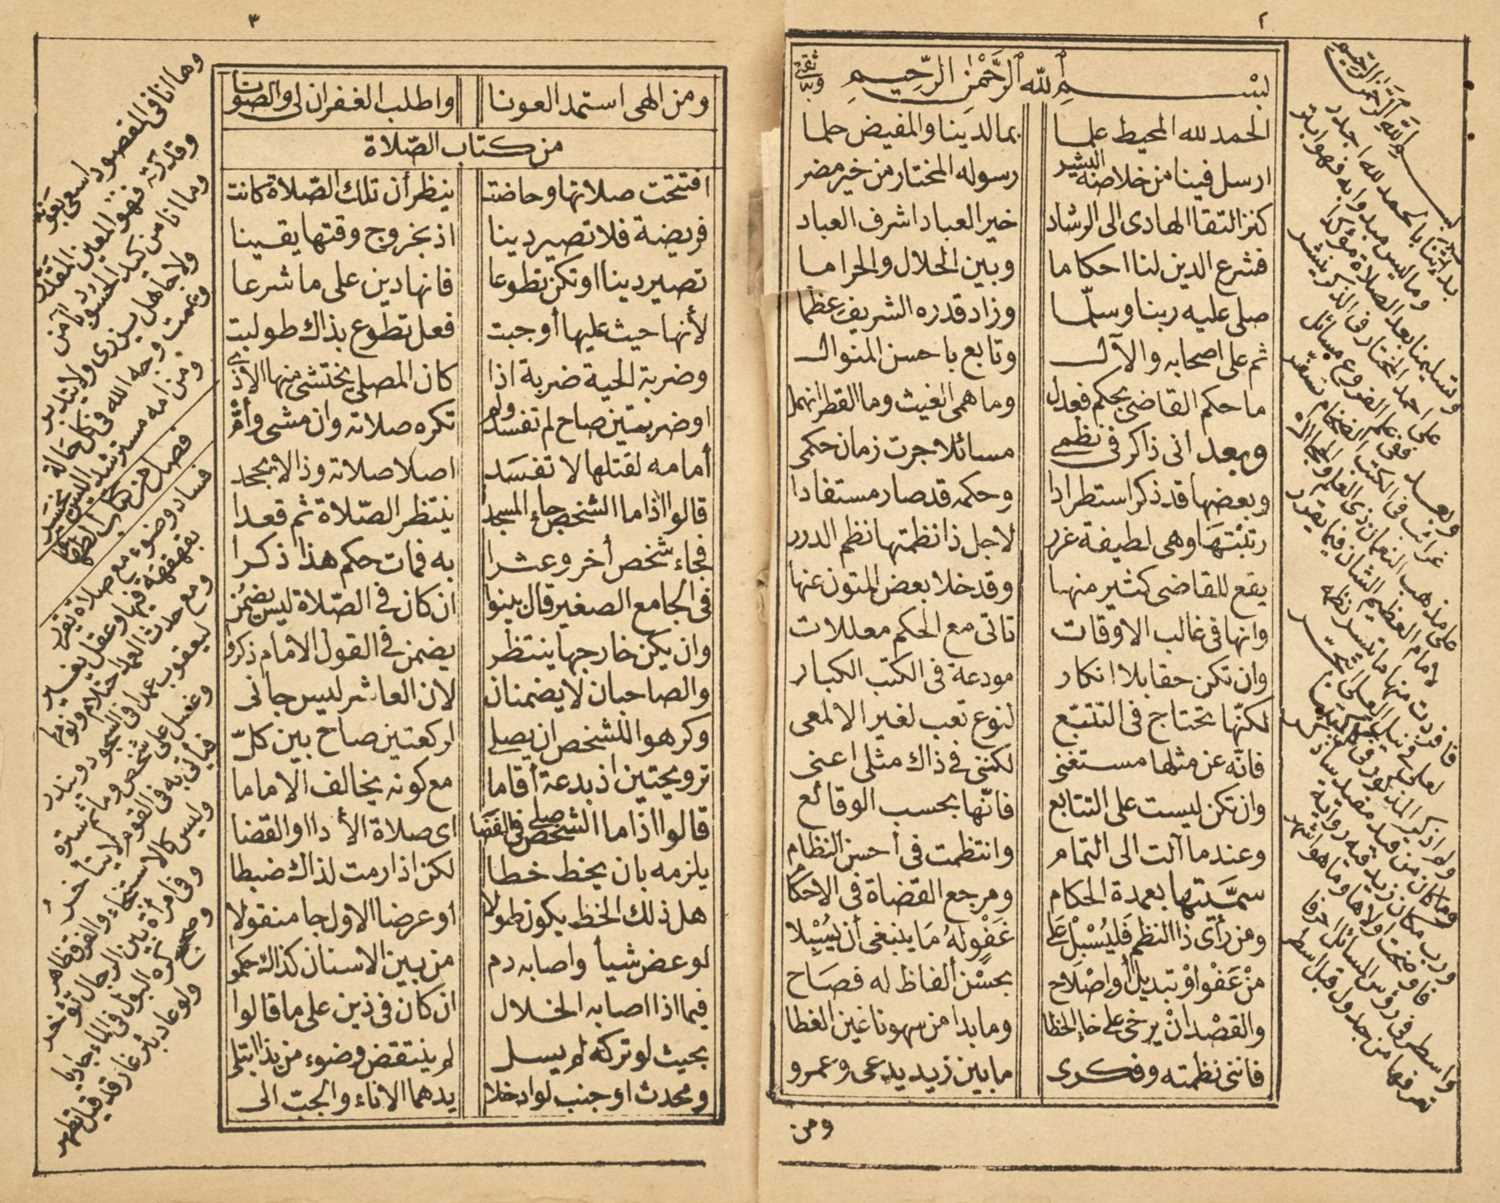 Lot 45 - Arabic printing. Small group of Arabic imprints, 19th century, with Persian MS fragments